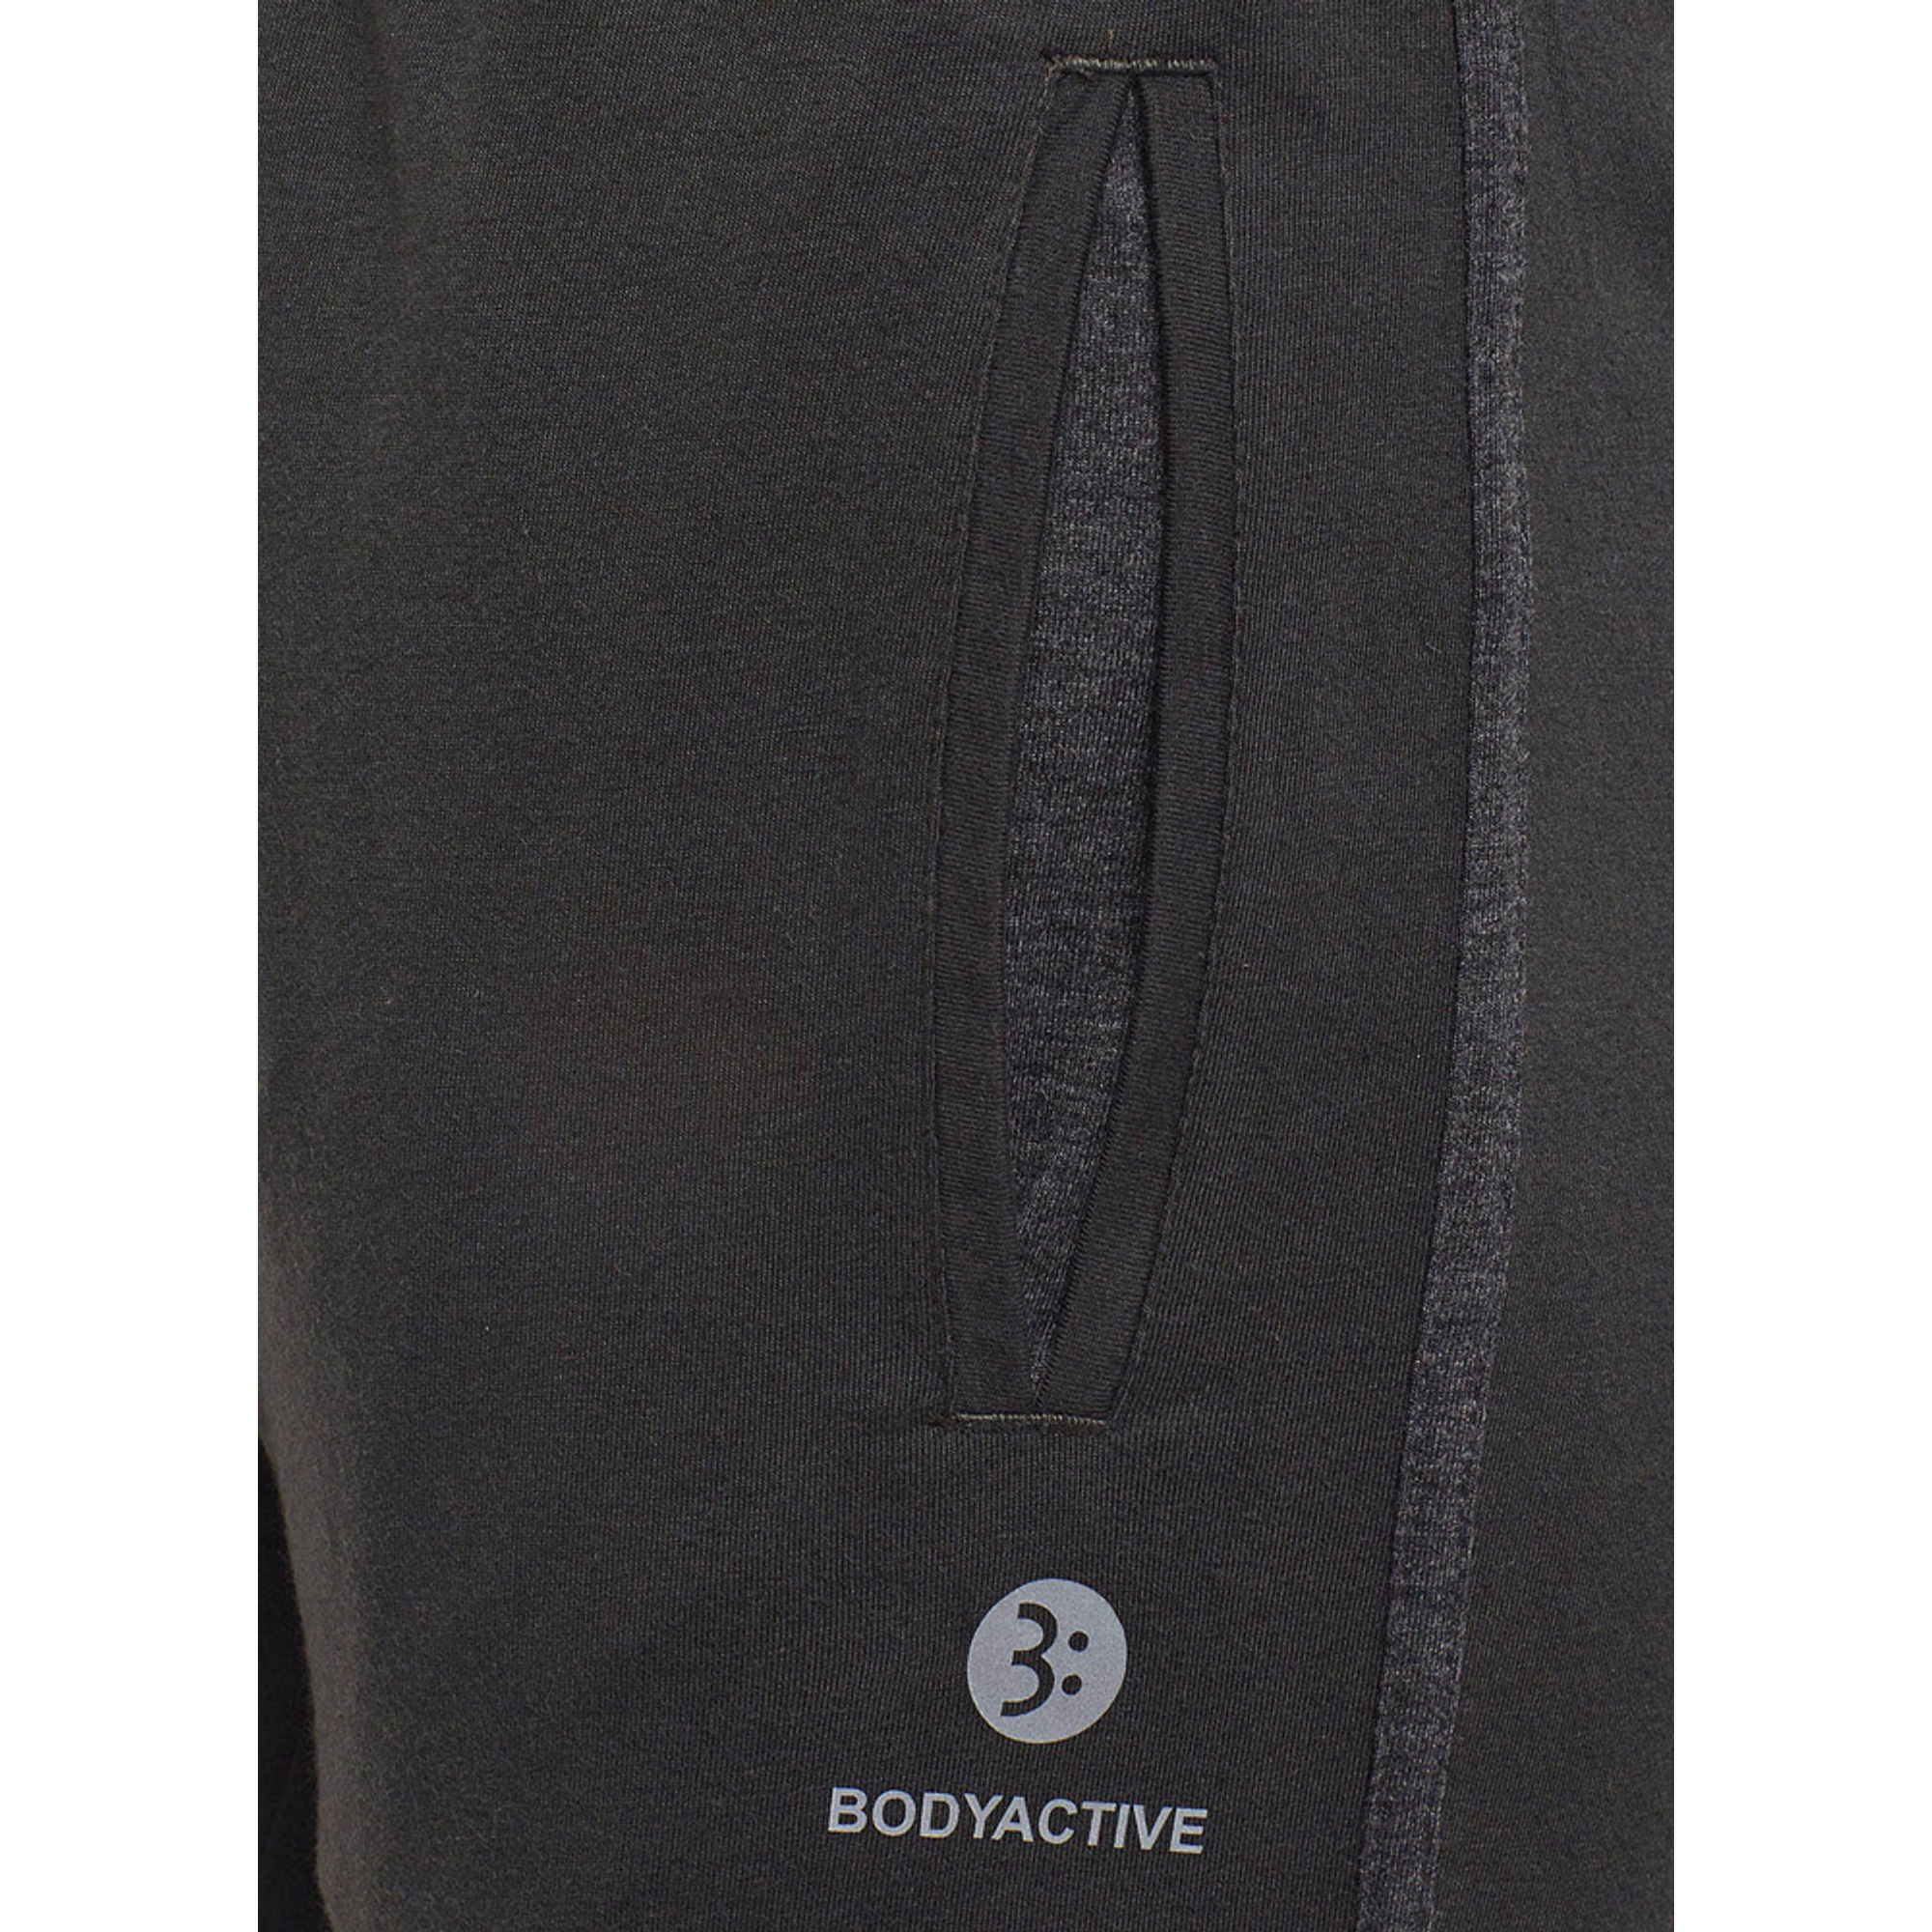 Buy online Purple Track Pant from bottom wear for Women by Bodyactive for  775 at 0 off  2023 Limeroadcom